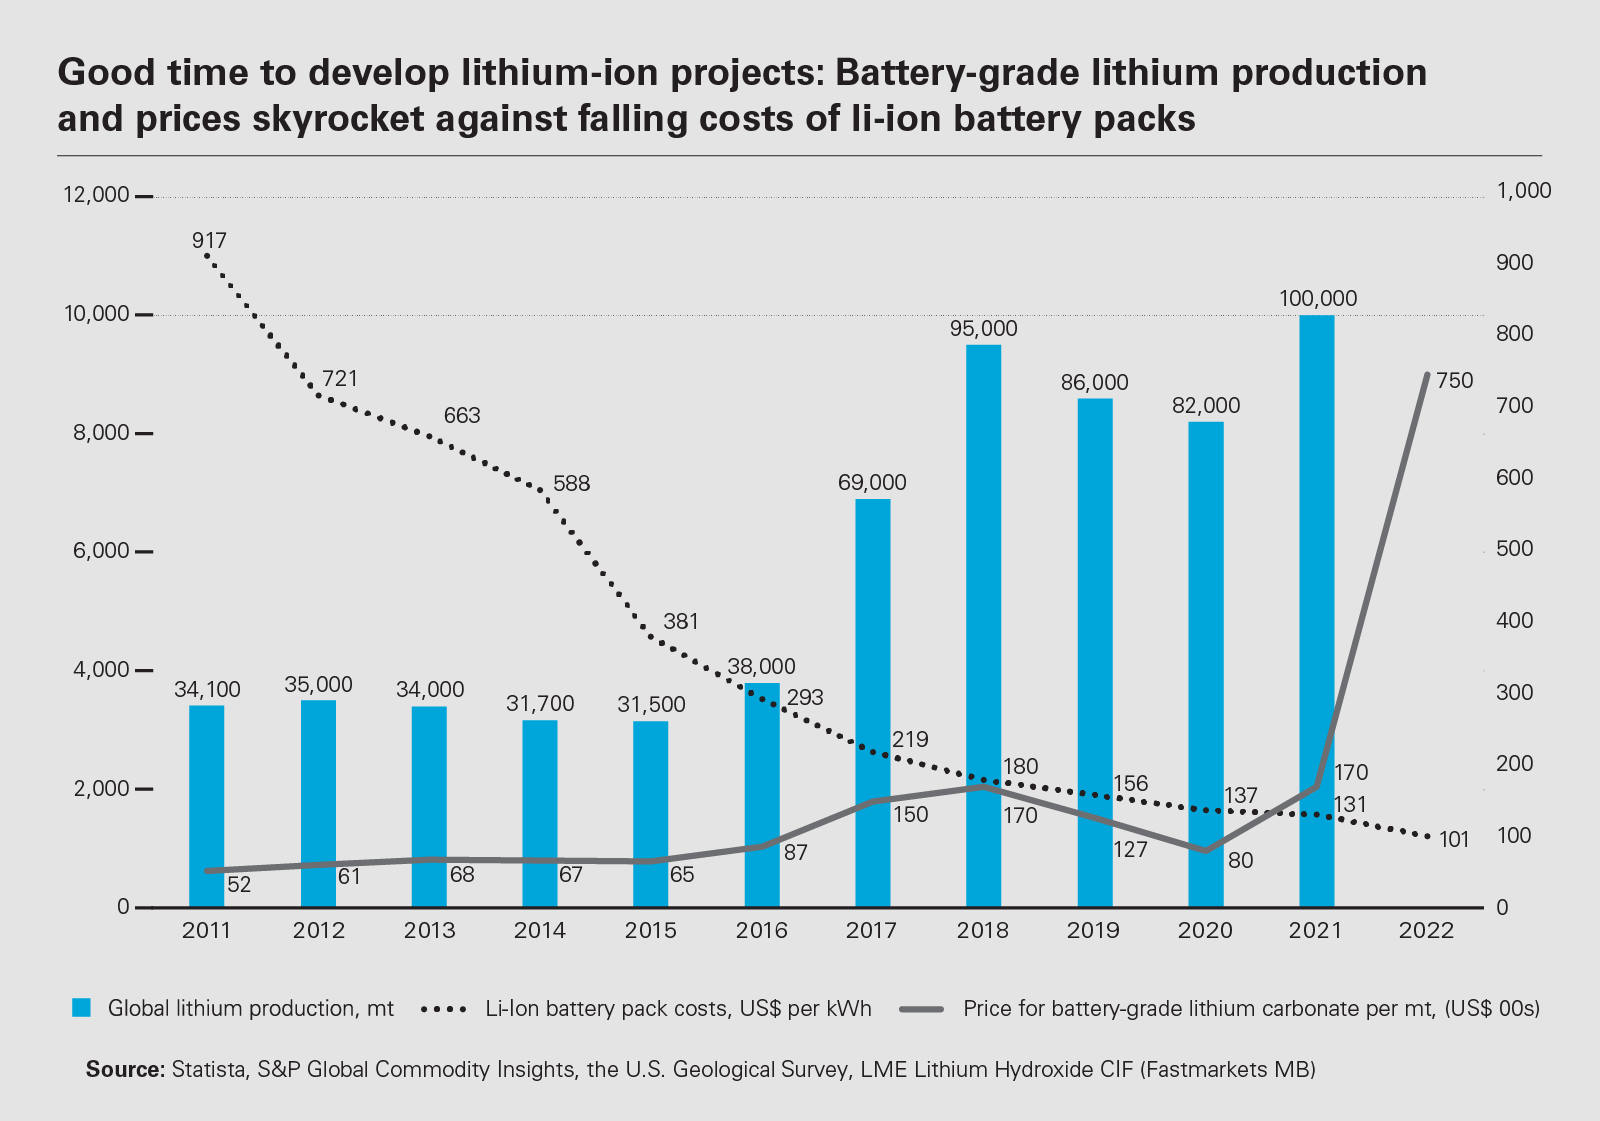 Good time to develop lithium-ion projects: Battery-grade lithium production and prices skyrocket against falling costs